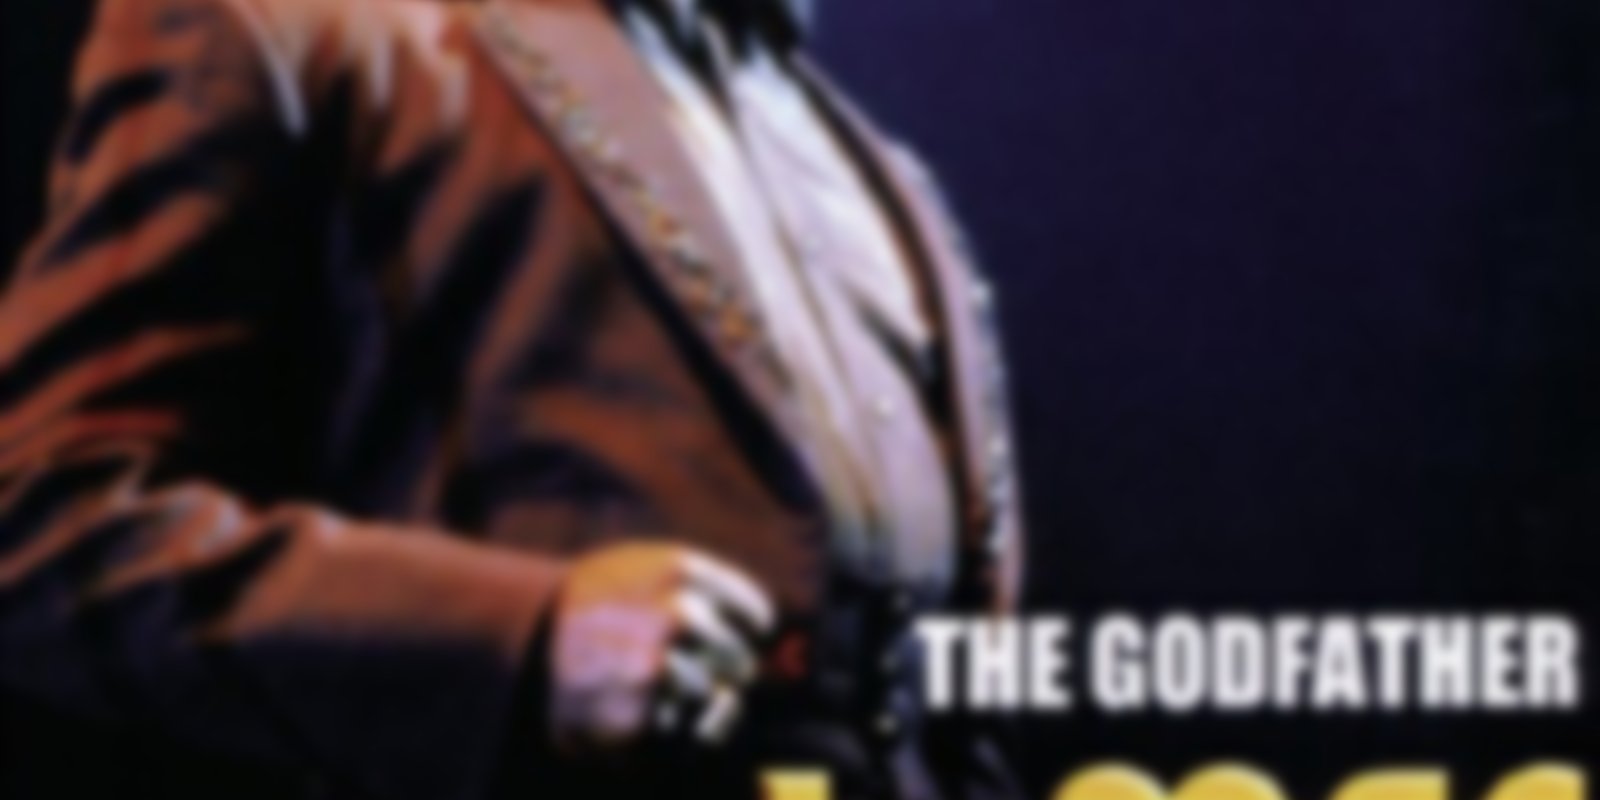 James Brown - The Godfather